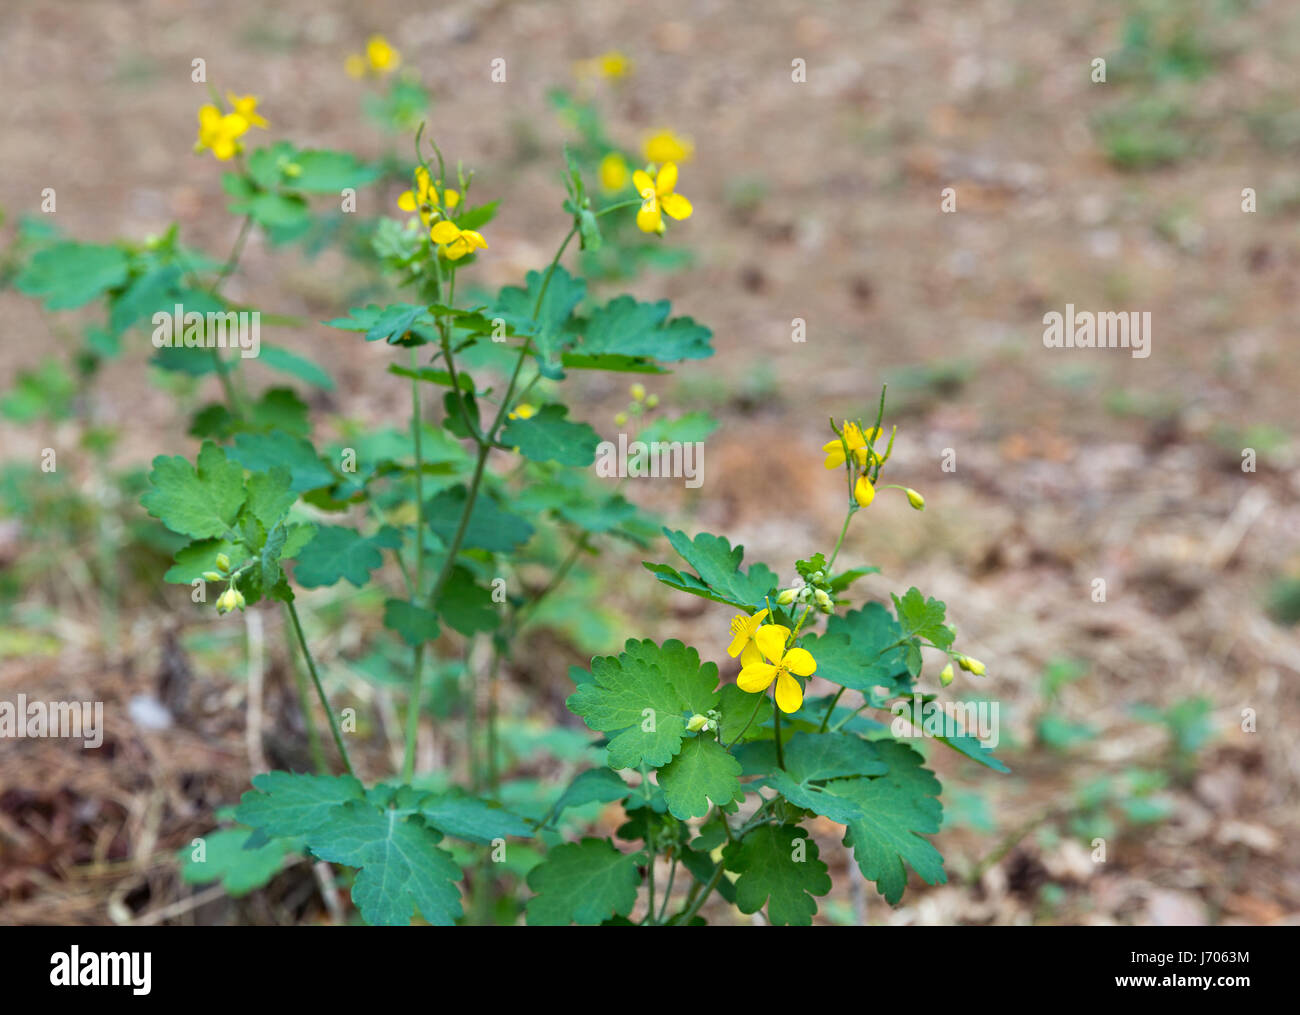 Wild healing plant celandine with yellow flowers closeup in the forest Stock Photo